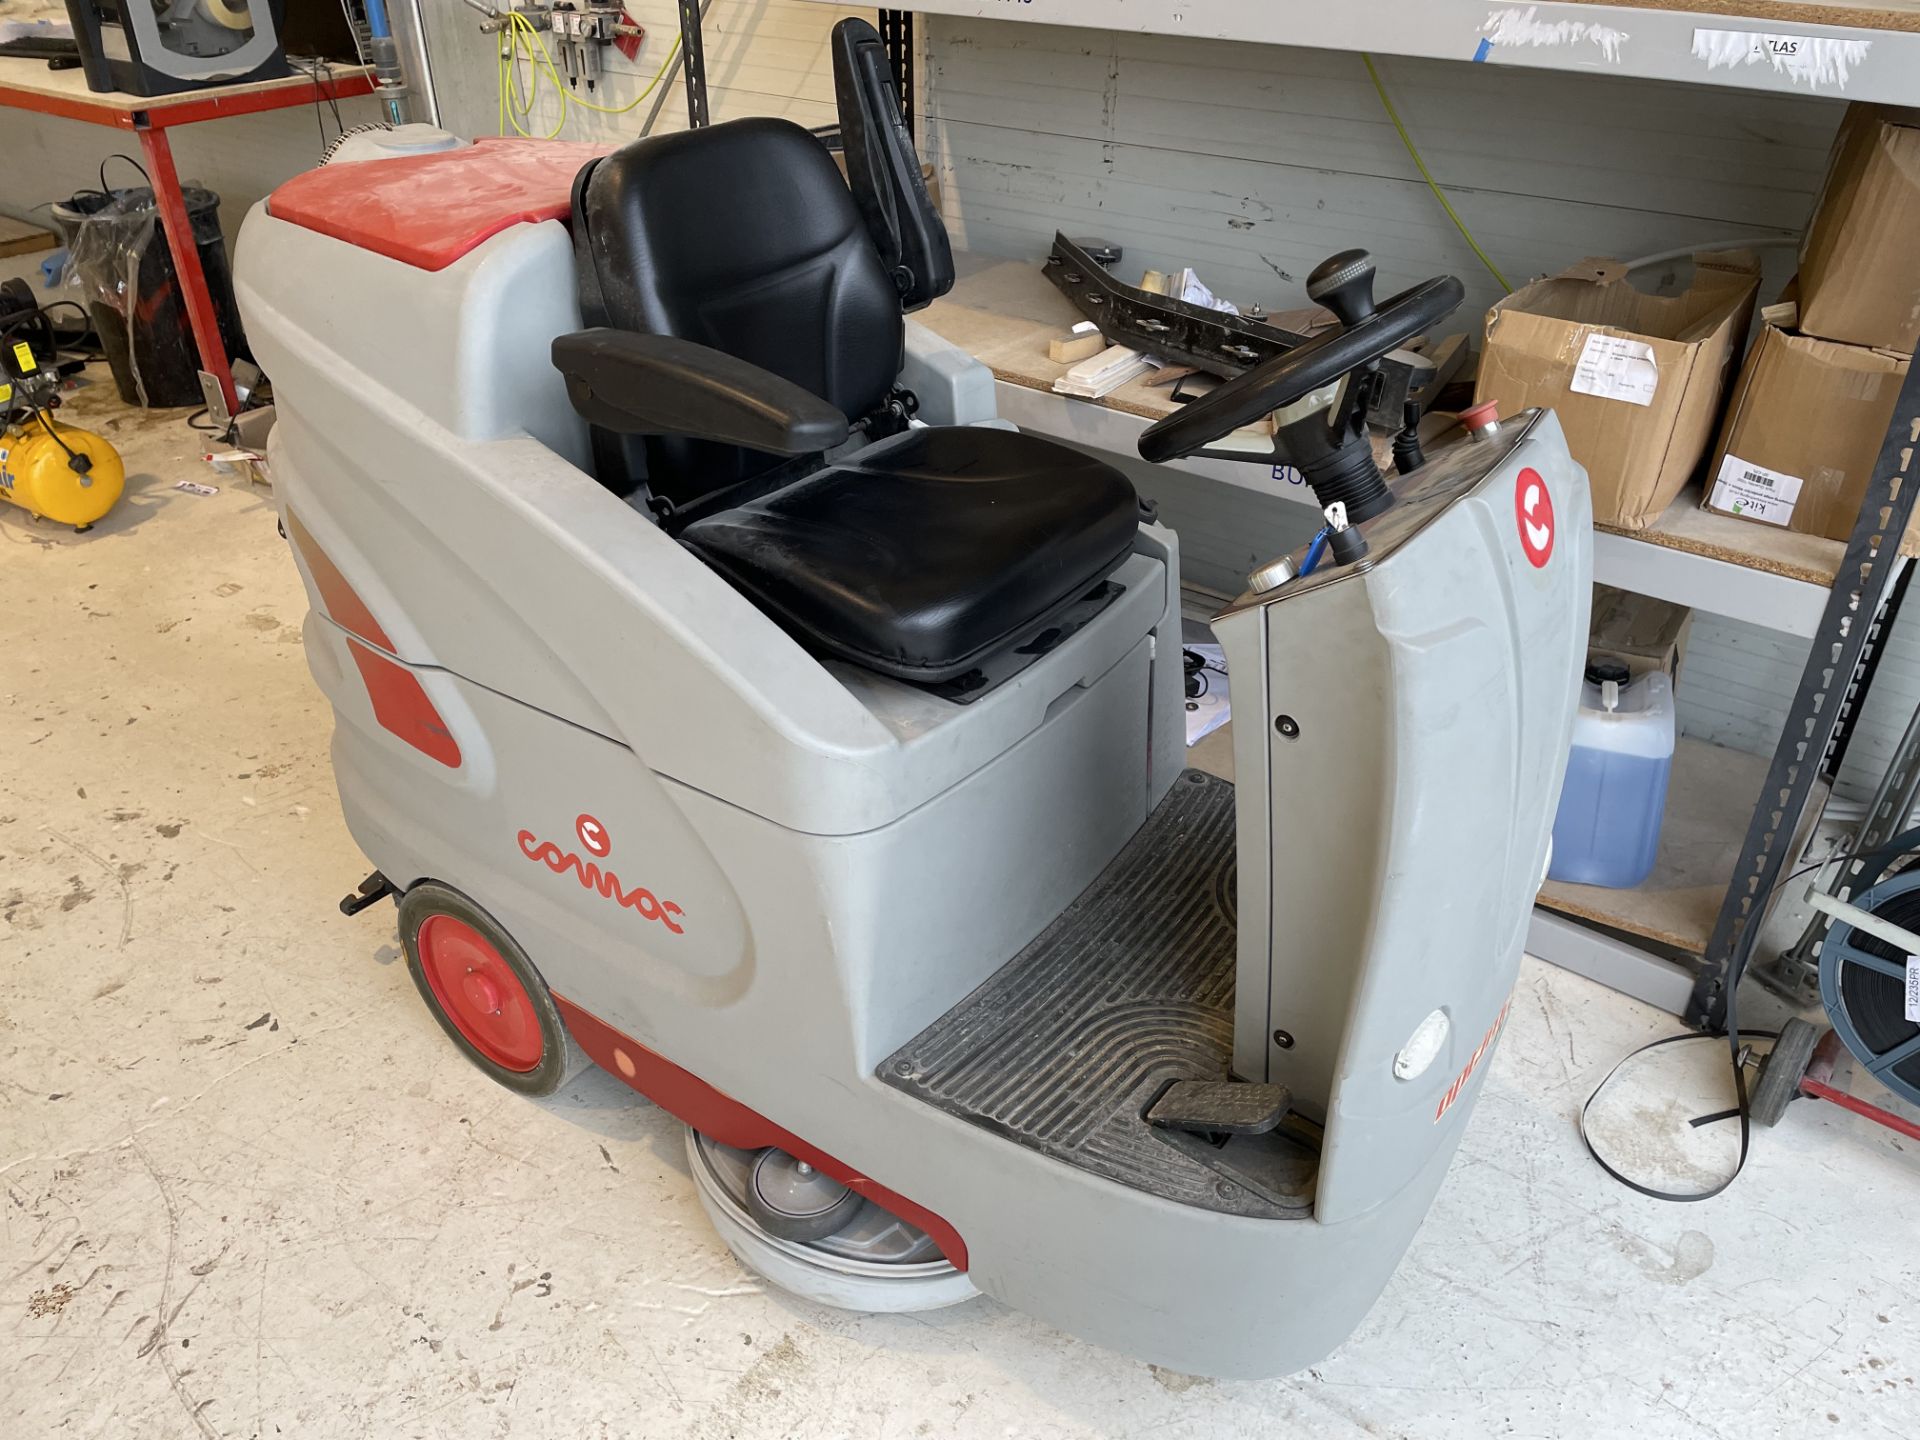 2016 Comac S.p.a. Optima 85B Ride-On Floor Cleaner S/No. 116010833